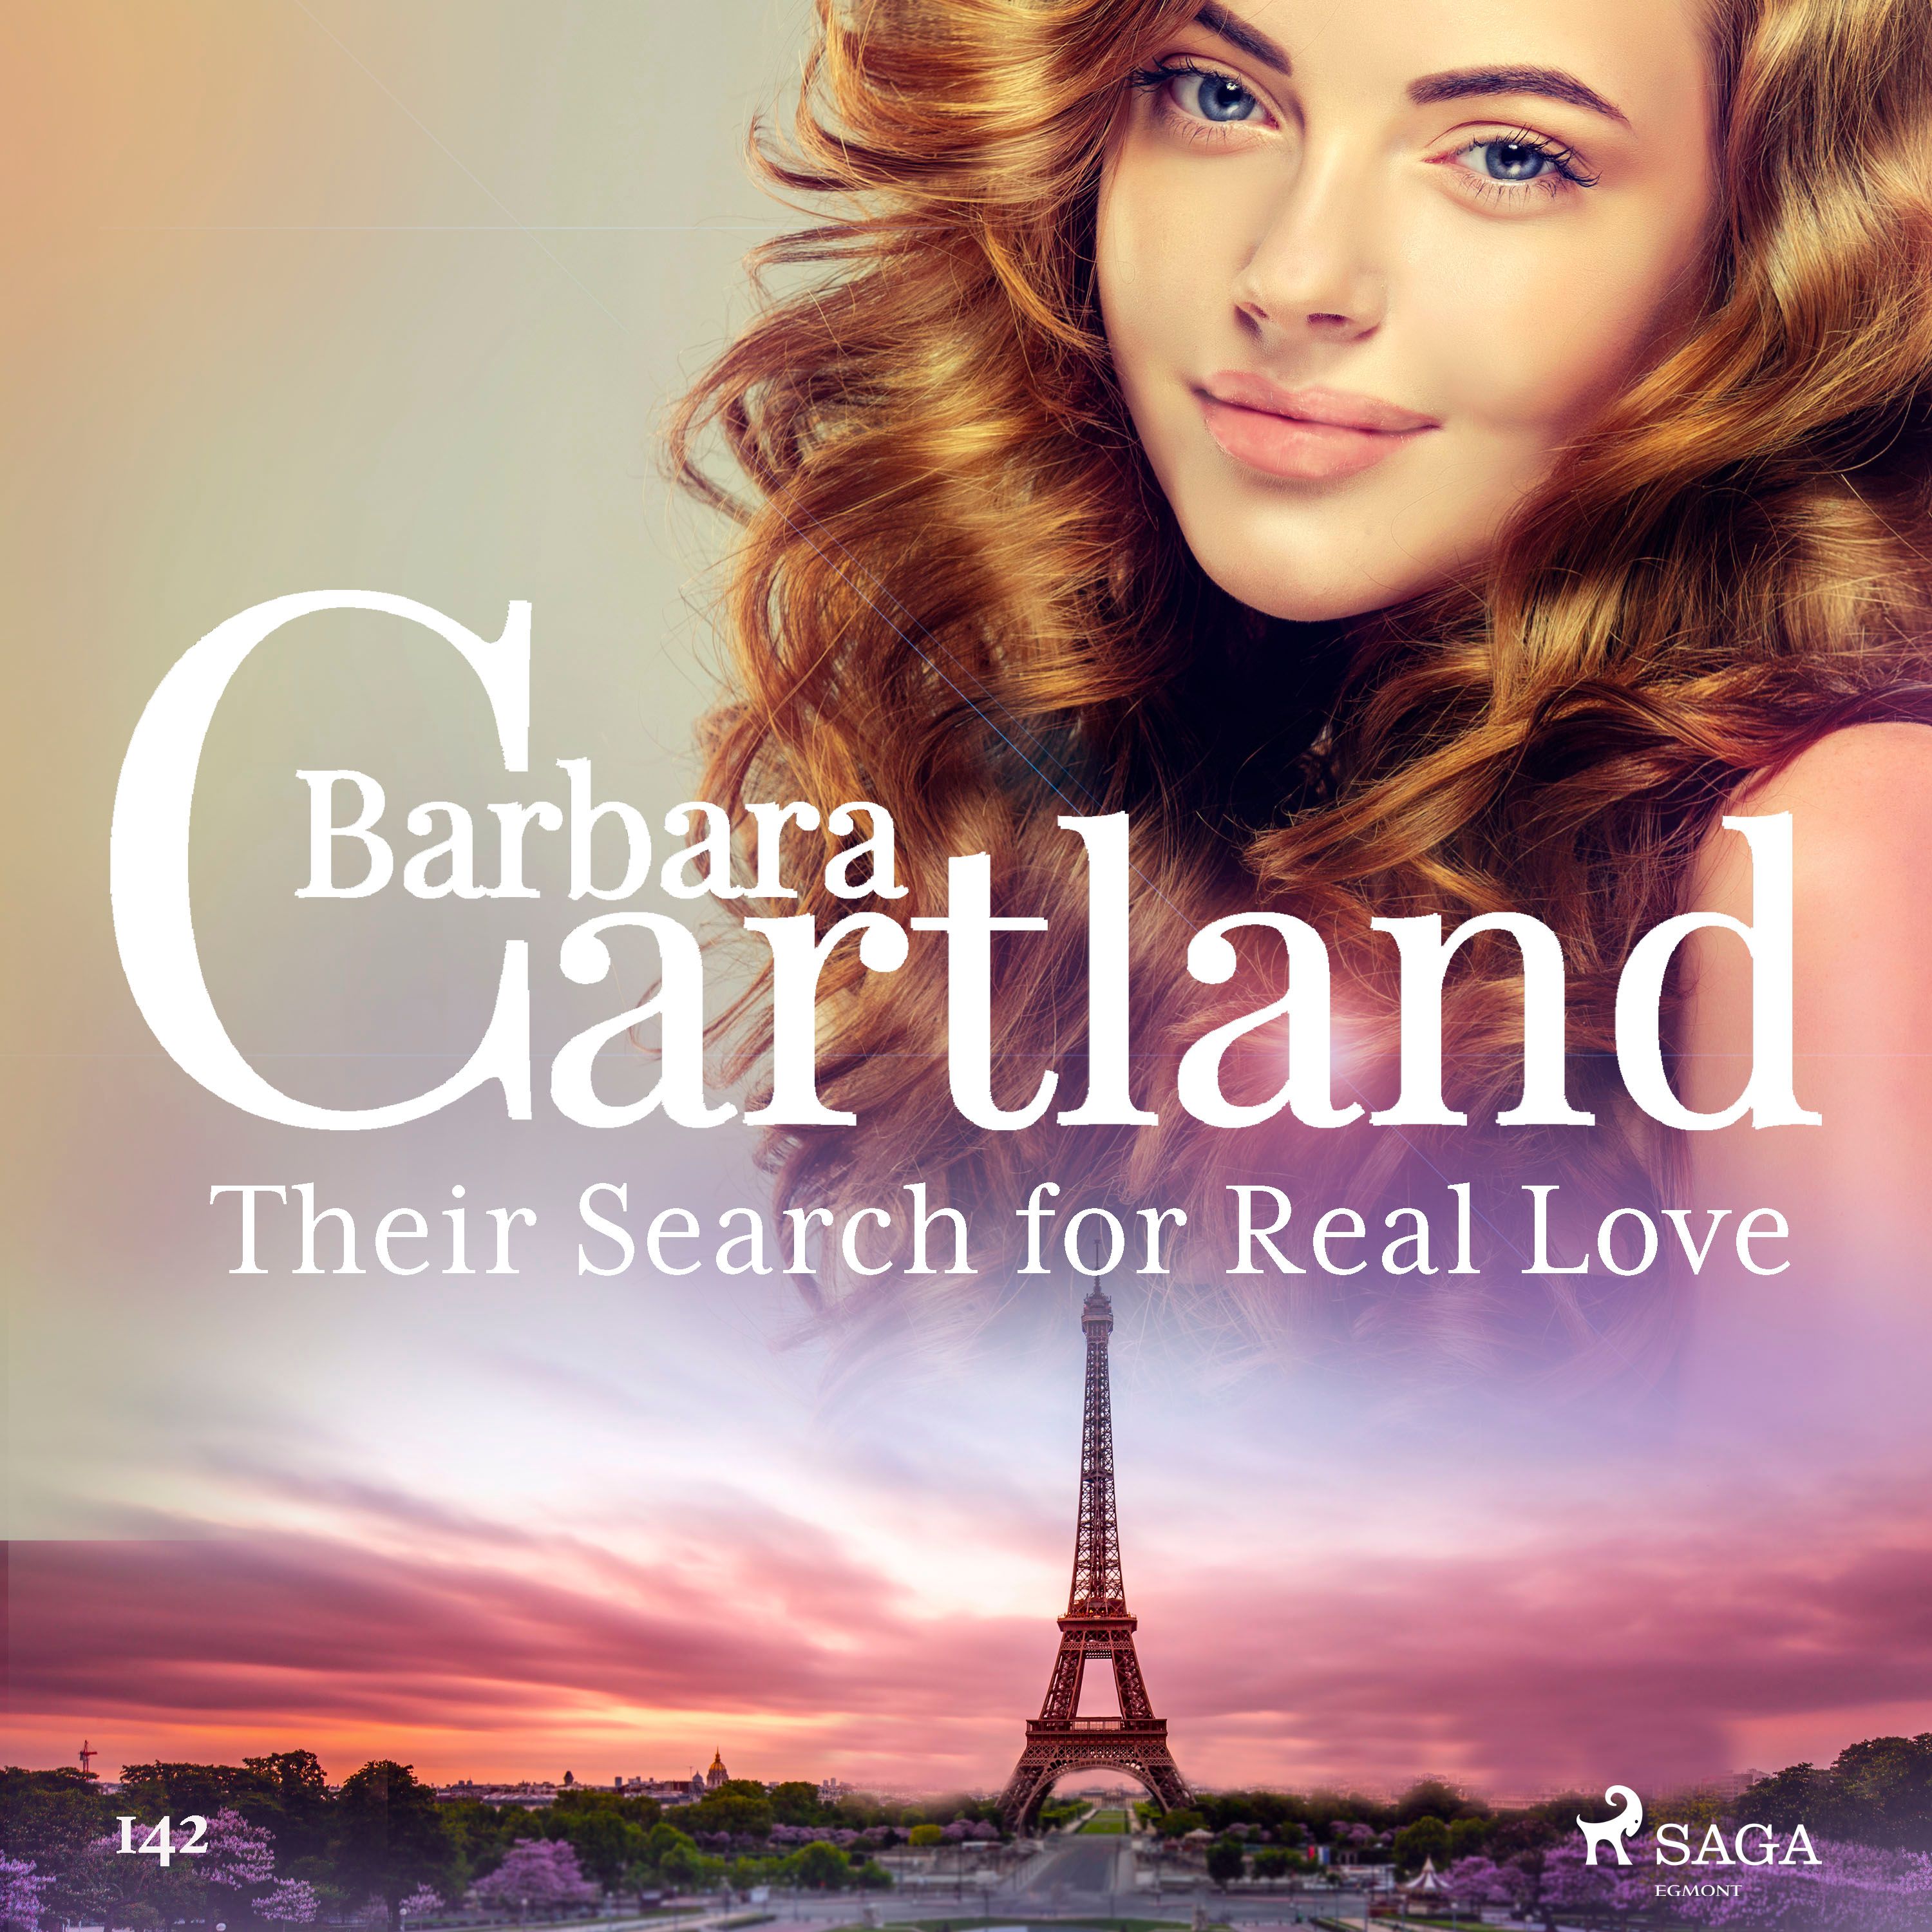 Their Search for Real Love (Barbara Cartland's Pink Collection 142), audiobook by Barbara Cartland